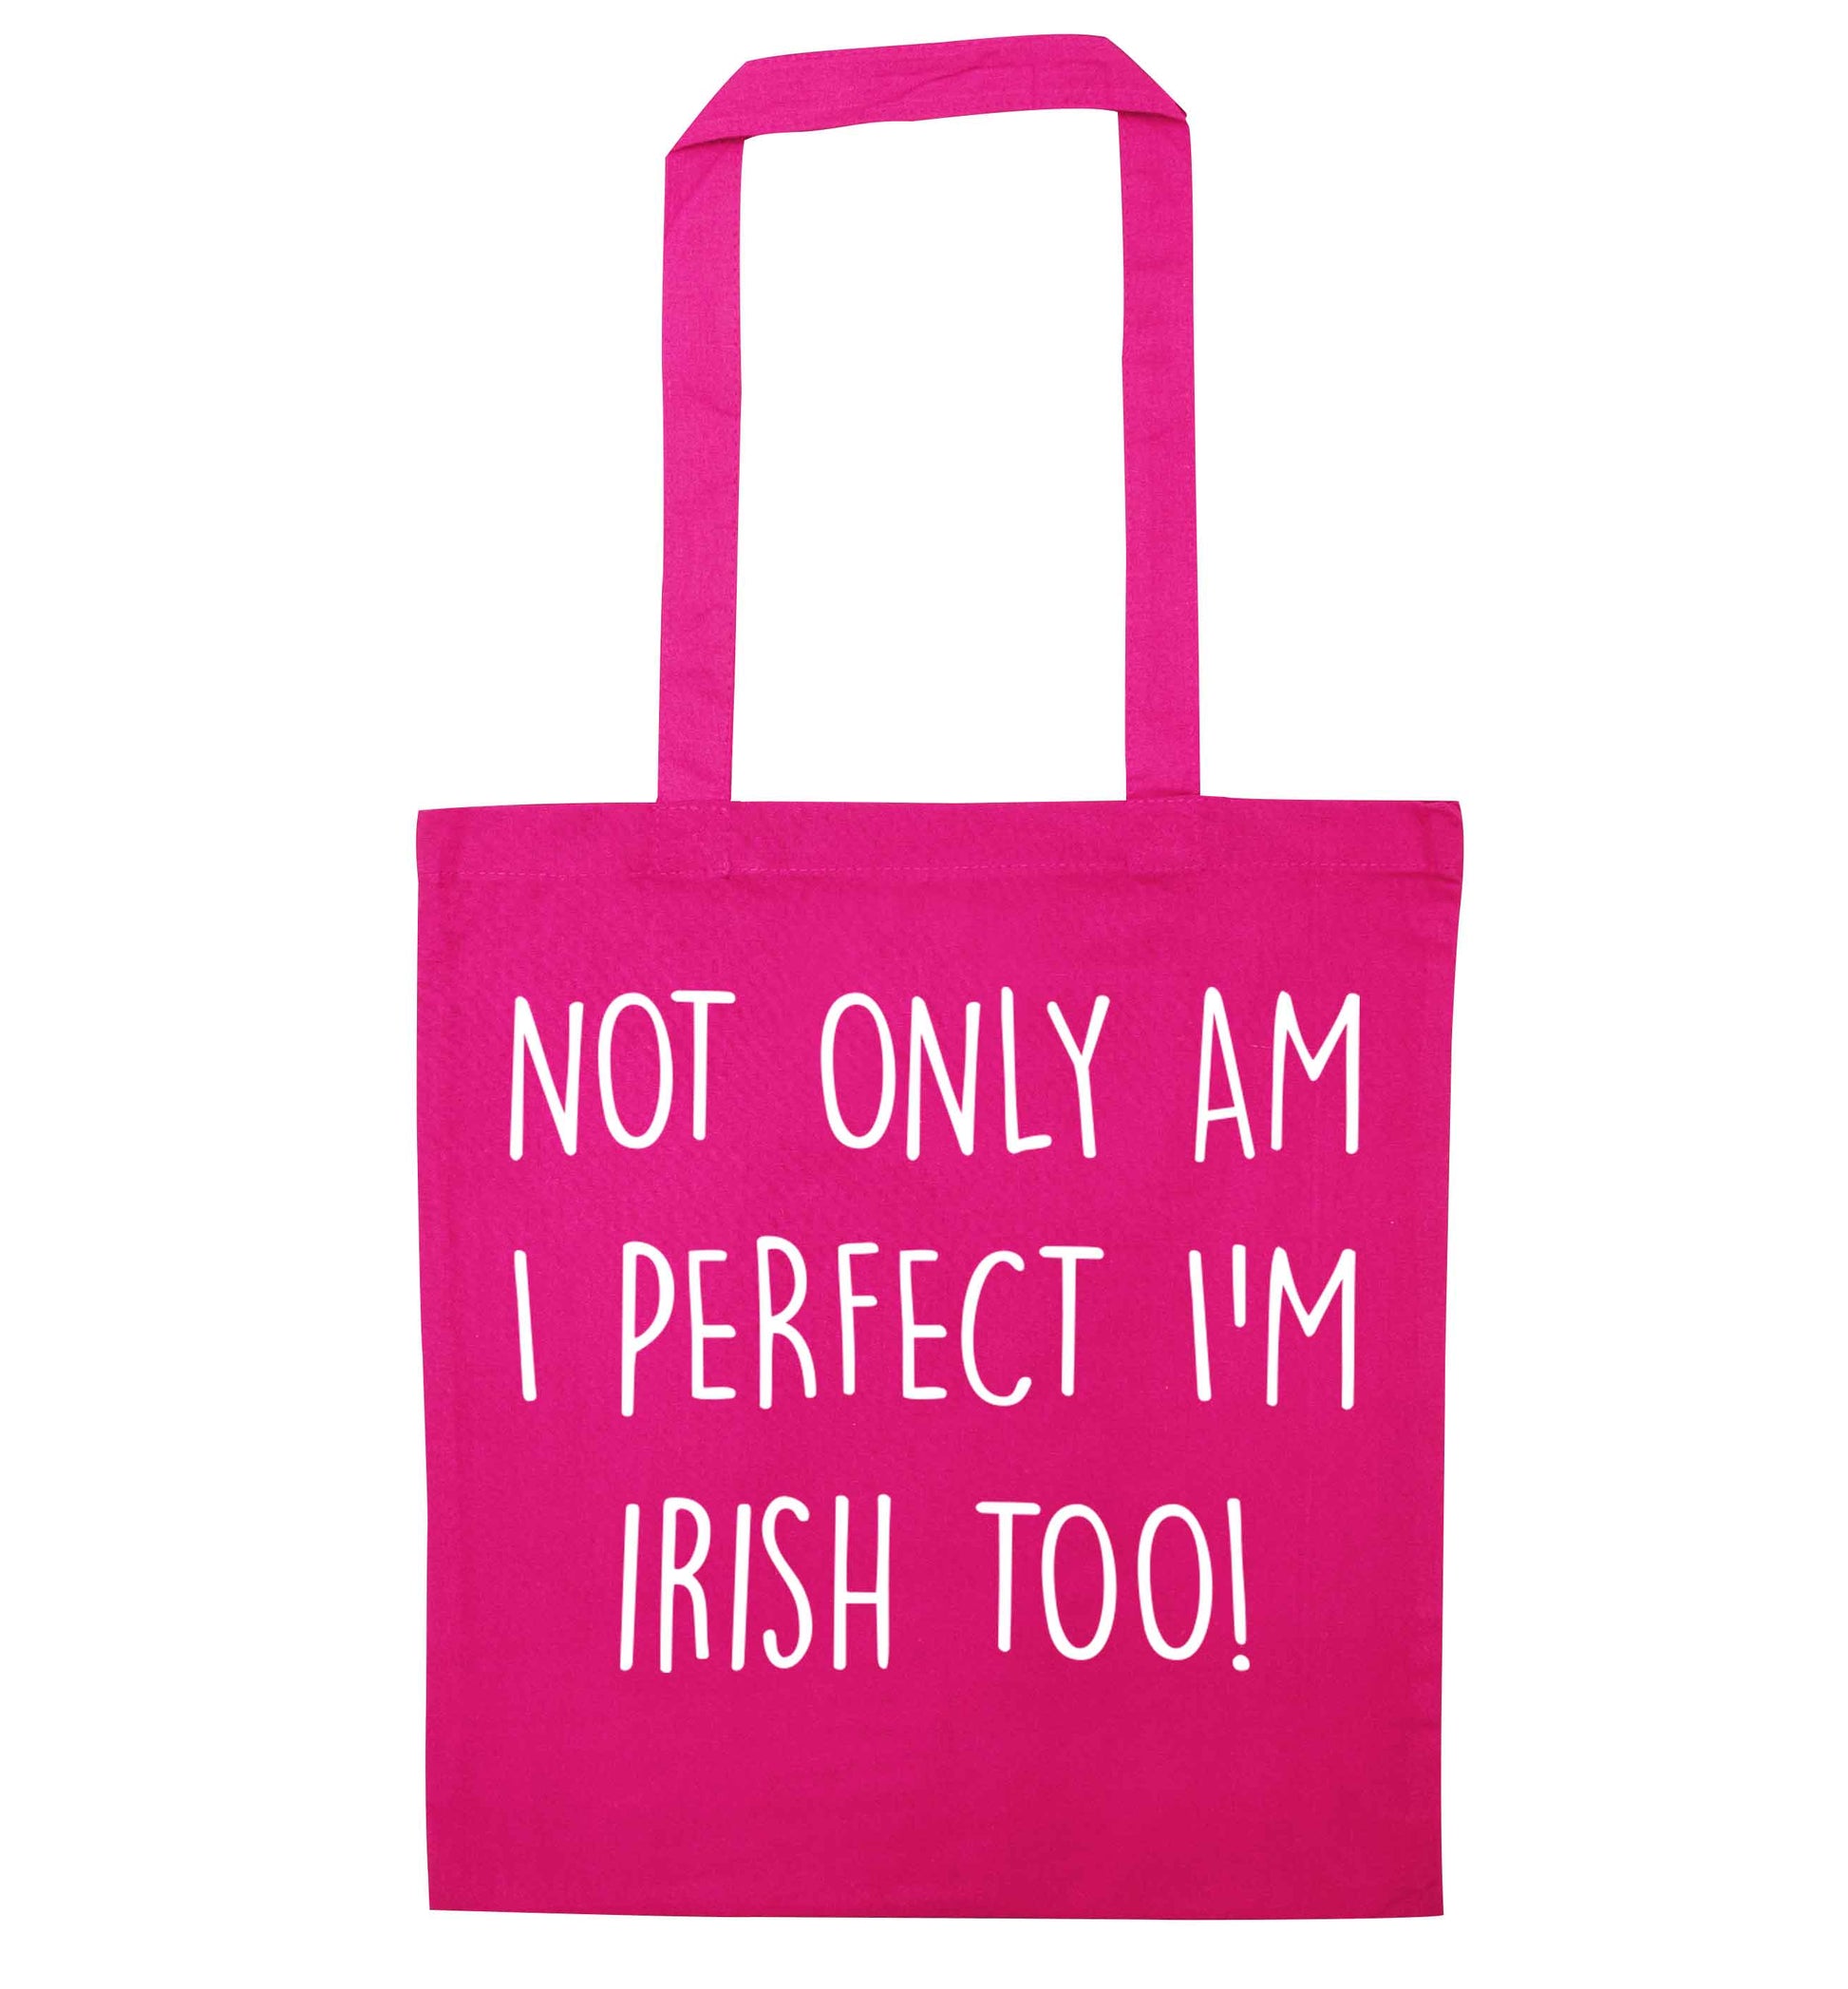 Not only am I perfect I'm Irish too! pink tote bag